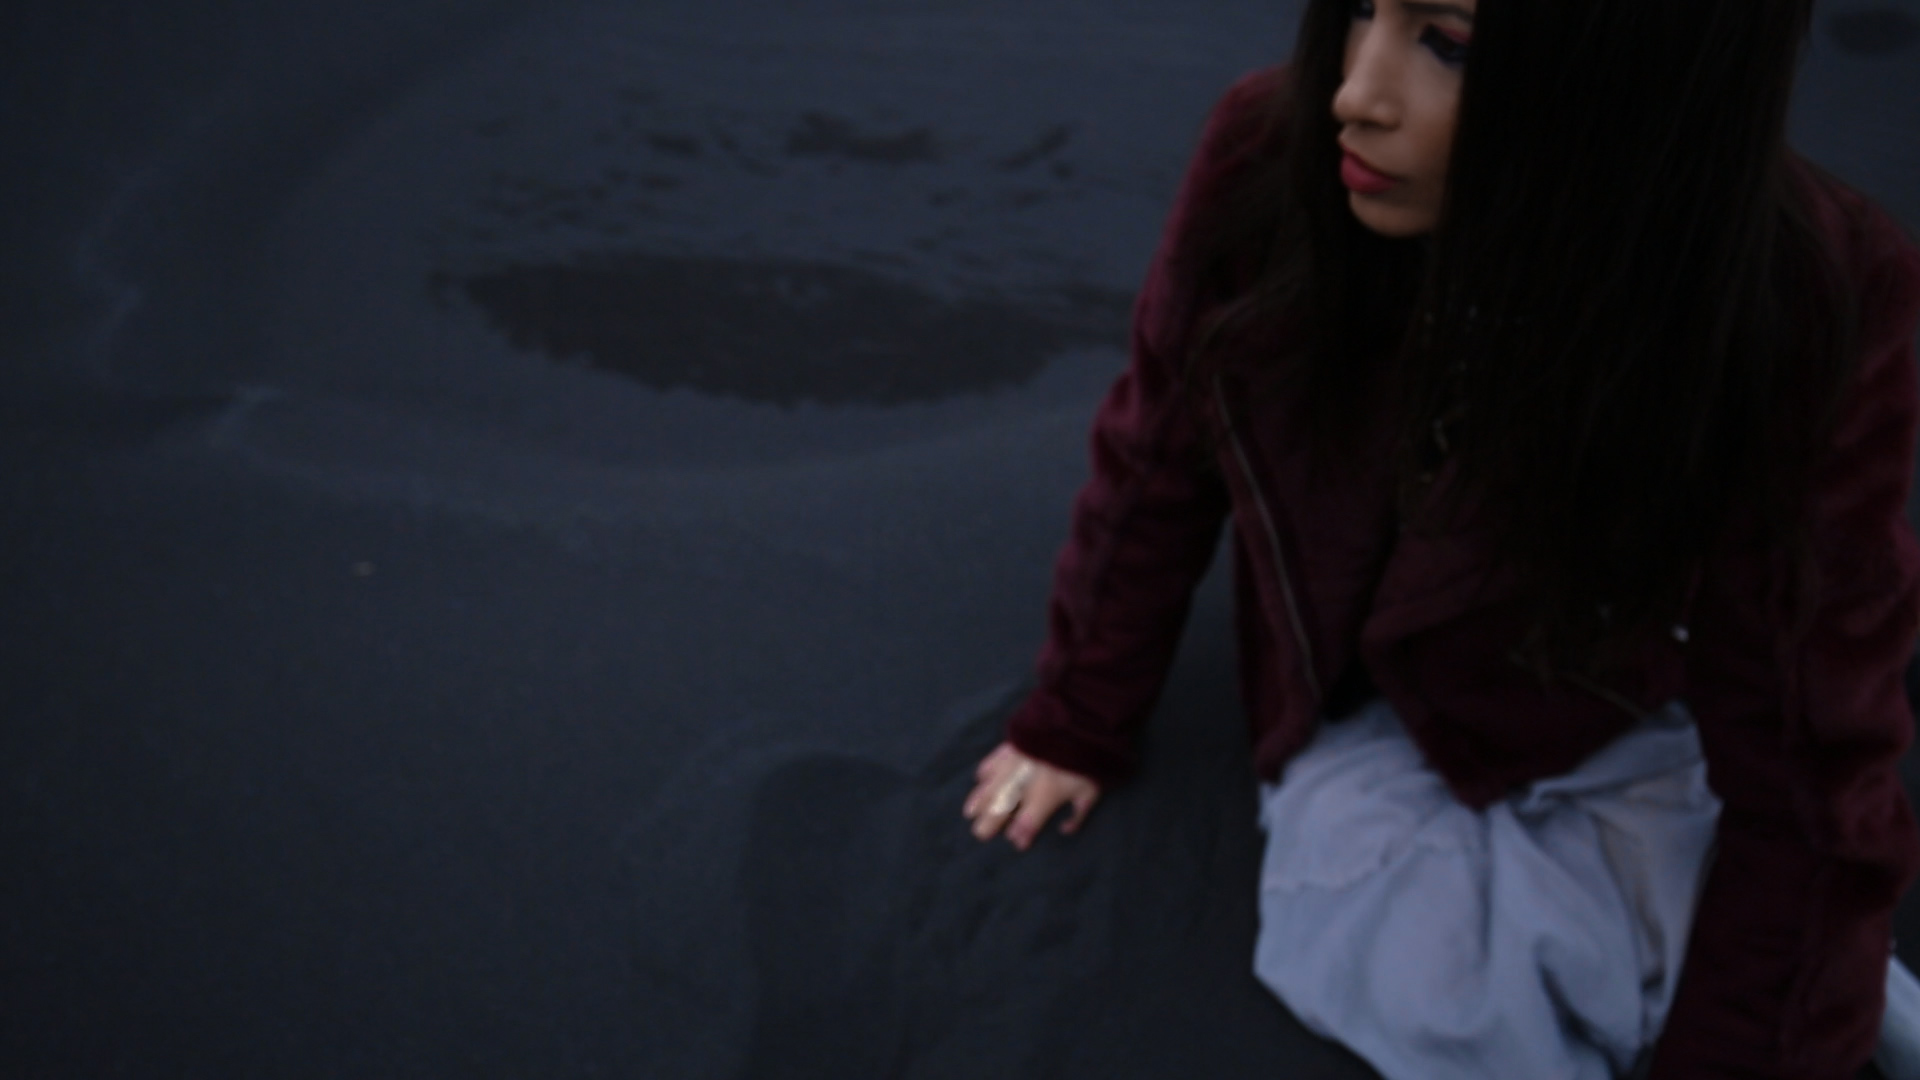 Francesca Miccoli on location in Iceland on the black sand beach Filming Angels and Demons watch the video on youtube now